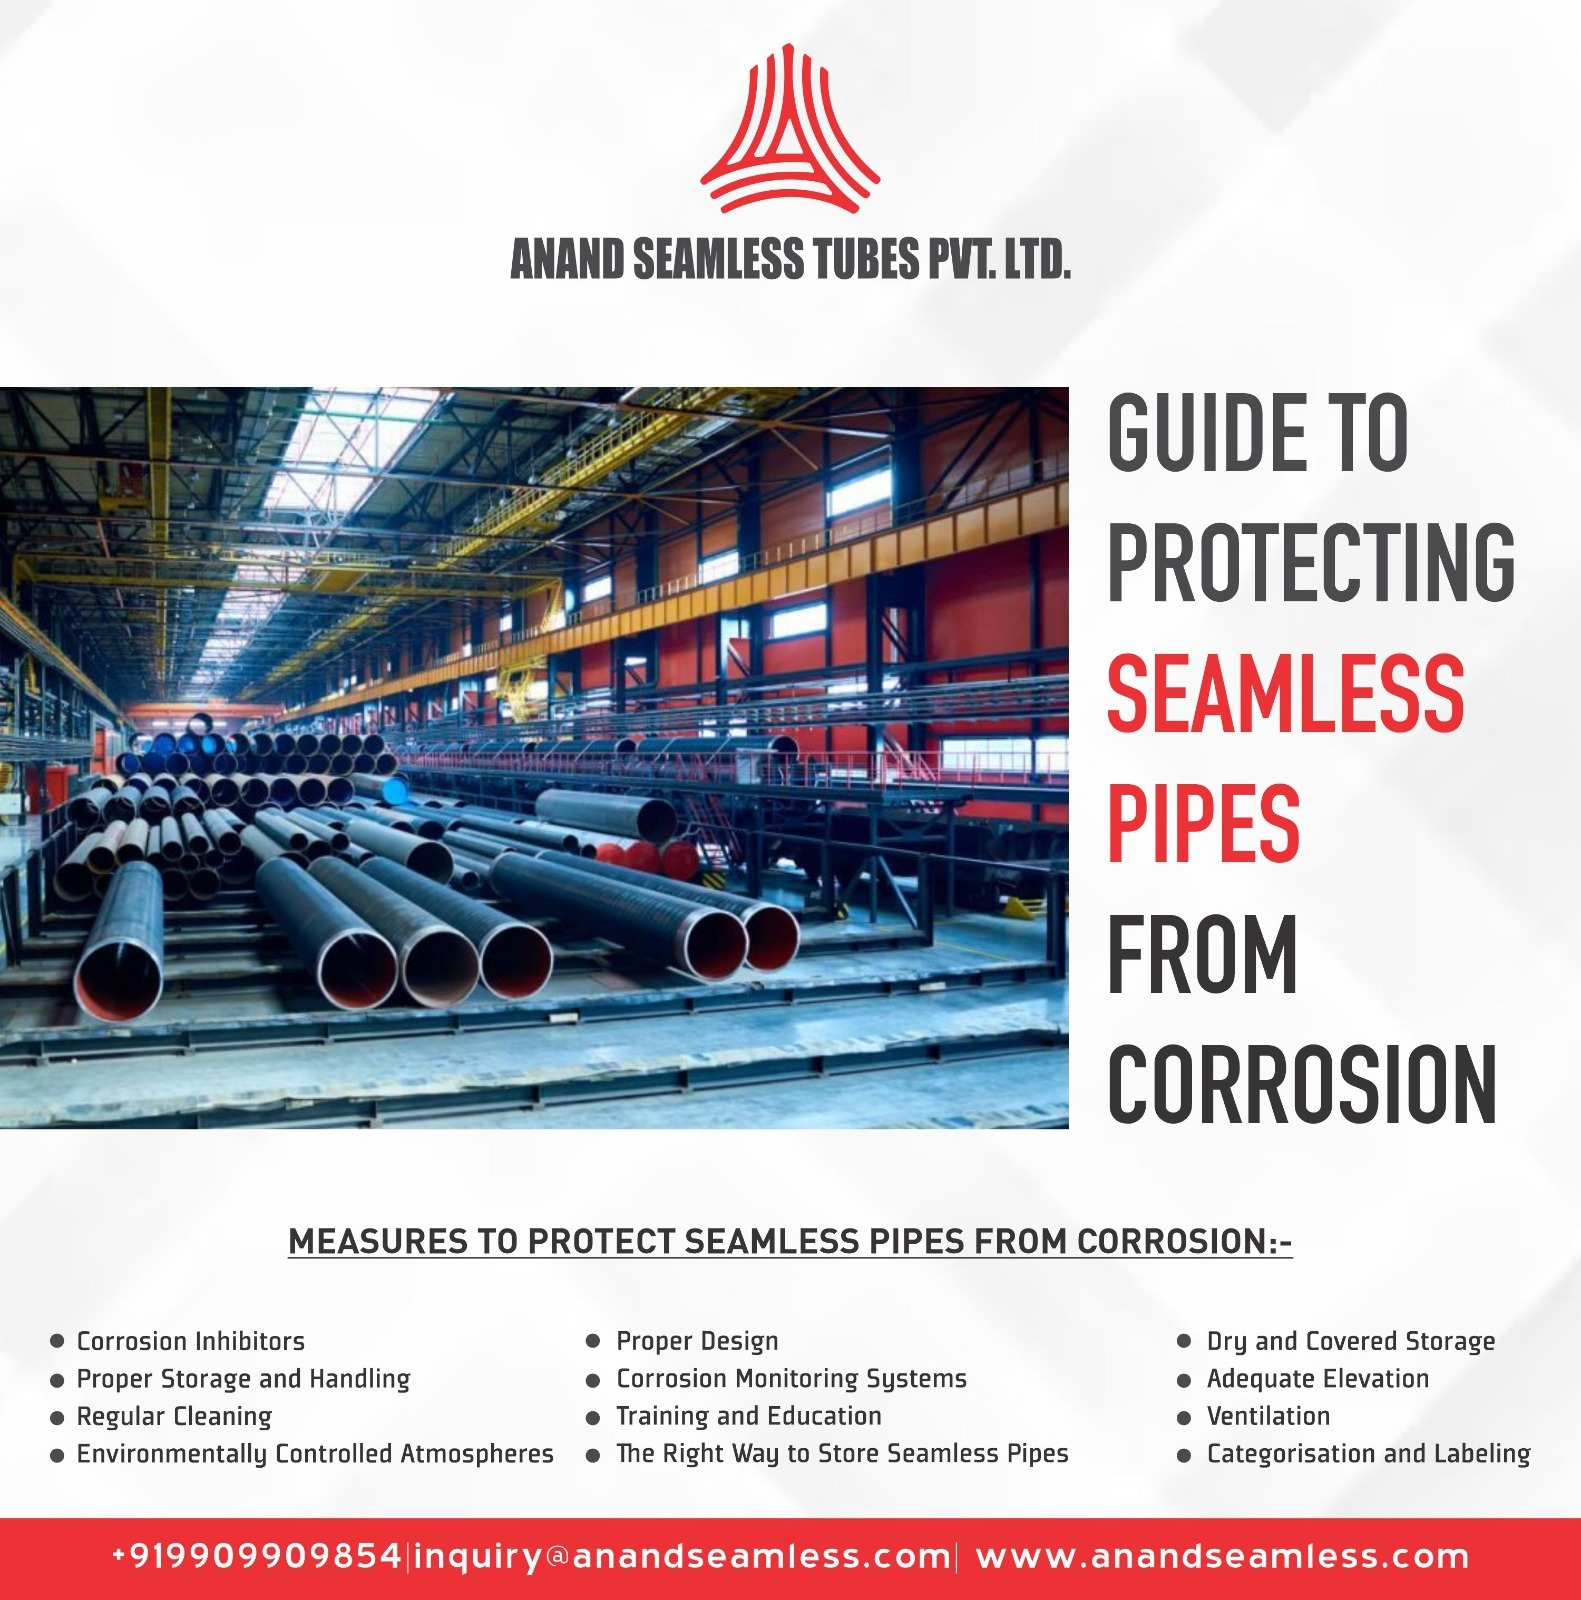 Guide to Protecting Seamless Pipes from Corrosion